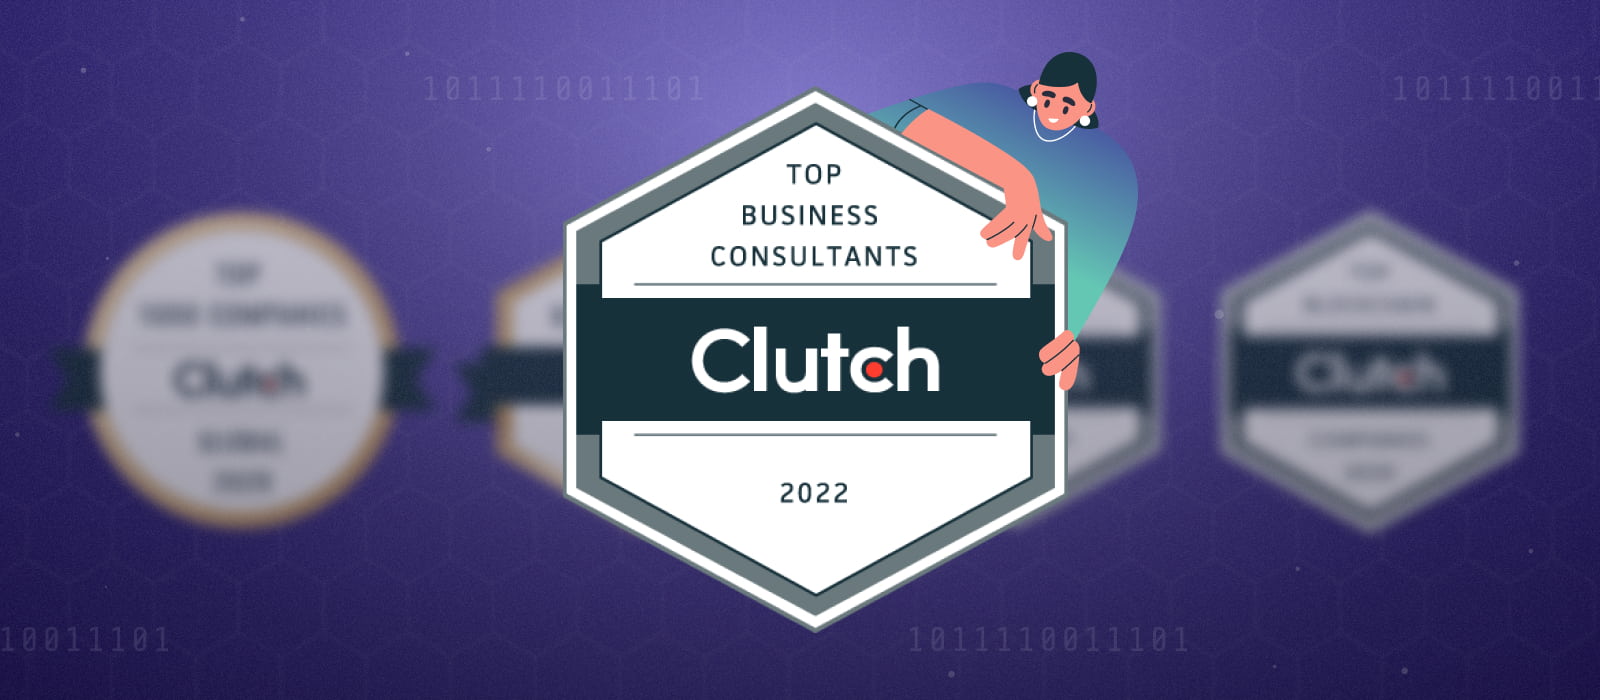 A person holds a badge of top business consultants 2022 according to Clutch